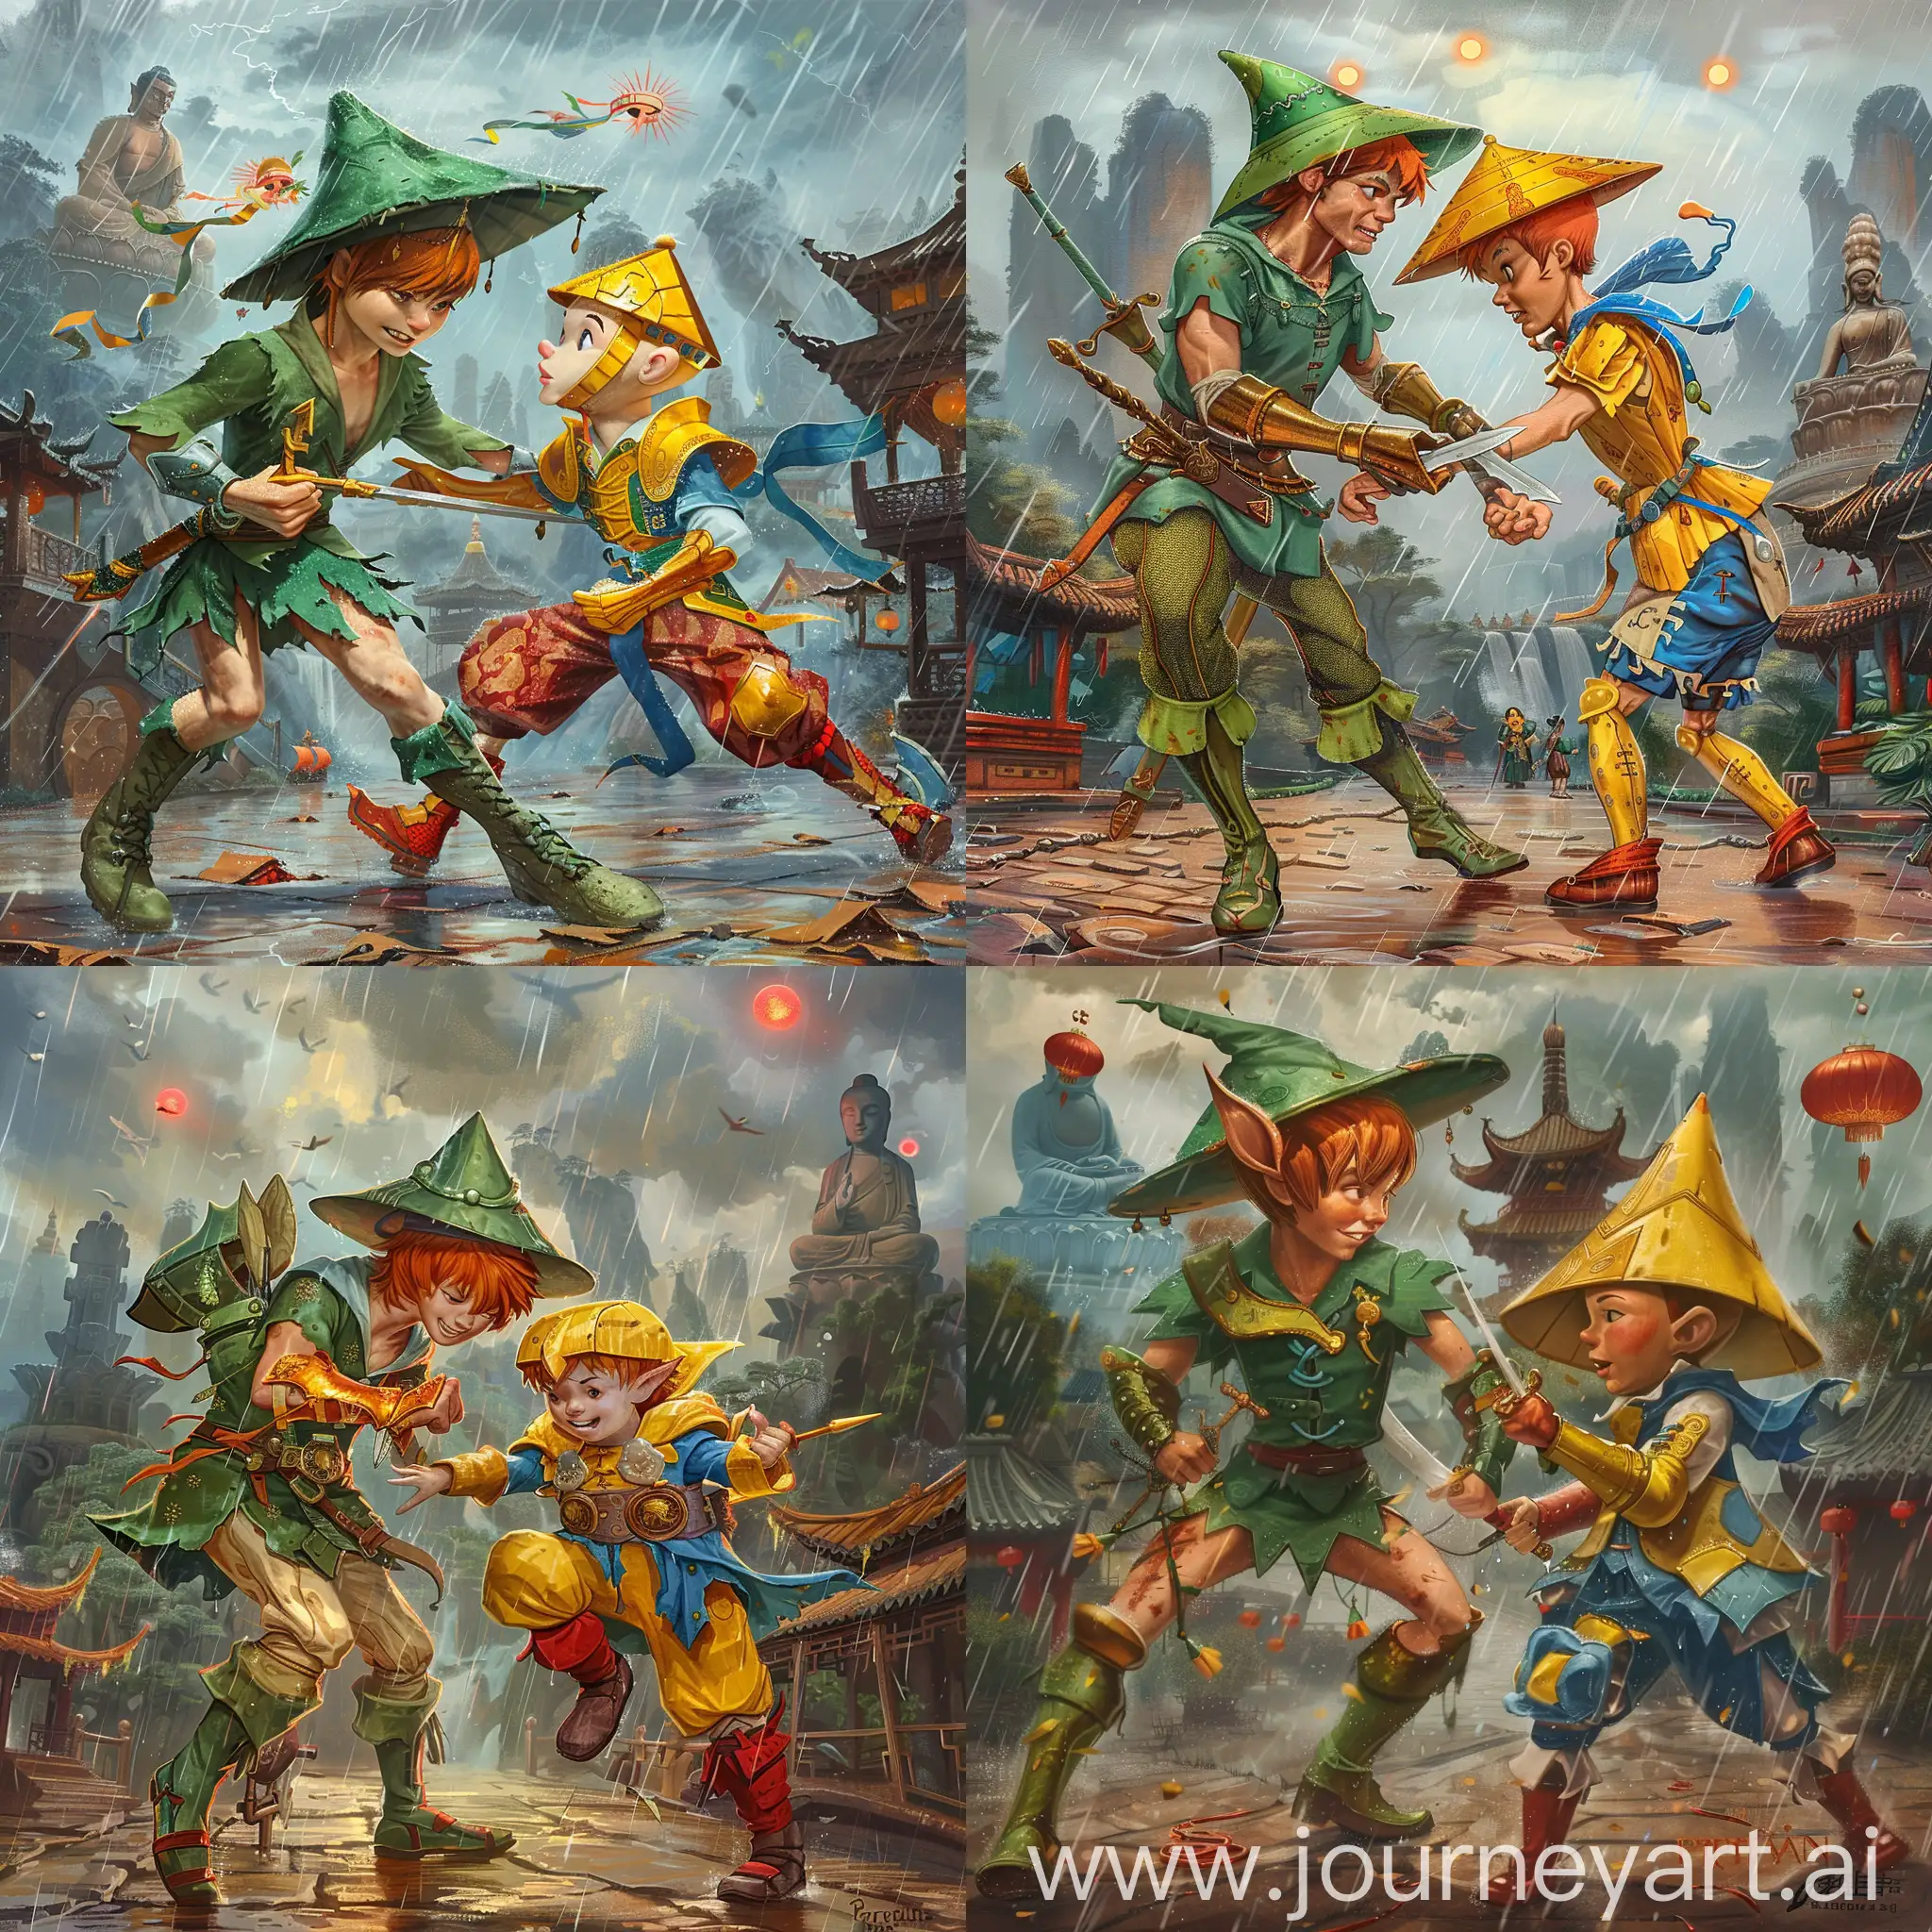 Historic painting style:

a handsome Peter Pan, from the Peter Pan cartoon, with orange brown hair,

he wears a green Chinese conic hat, deep green and light green colors Chinese style medieval armor and boots,

a Disney beautiful wooden Pinocchio, from the Pinocchio cartoon, he has yellow Chinese medieval triangular helmet, he wears yellow and blue color Chinese style medieval armor, red pants and boots, 

they both hold their Chinese daggers to fight against each other.

Chinese Leshan Budda and Buddhist mounts as background, and three small red suns in storm rainy sky.